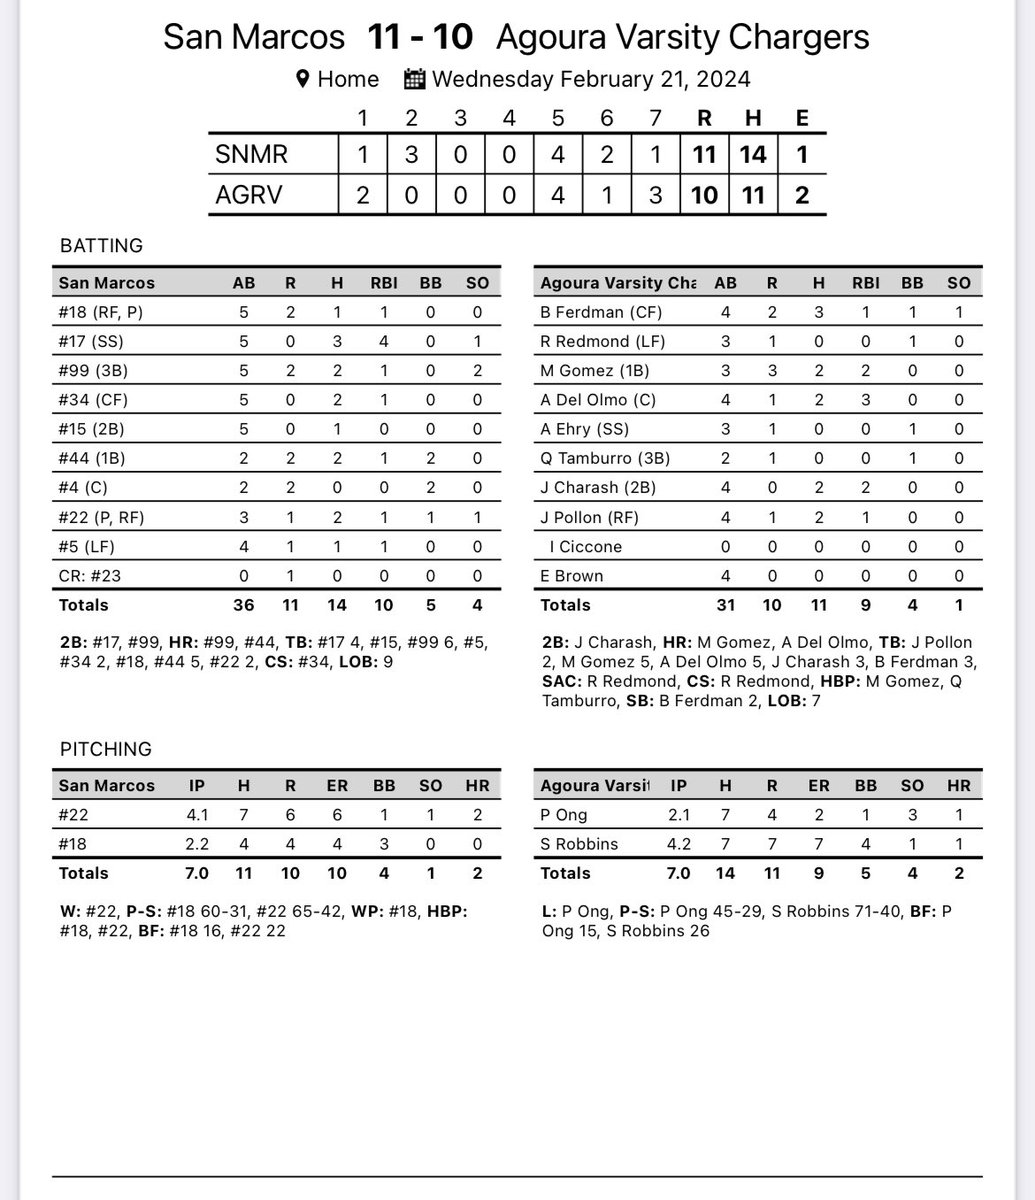 Tough loss to San Marcos, lots of hitting on both sides, Ferdman 3 hits, Gomez HR, Del Olmo HR, Pollon and Charash 2 hits. Off till next week, home game vs Notre Dame Tuesday. @AHS_Chargers @vcspreps @TheAcornSports